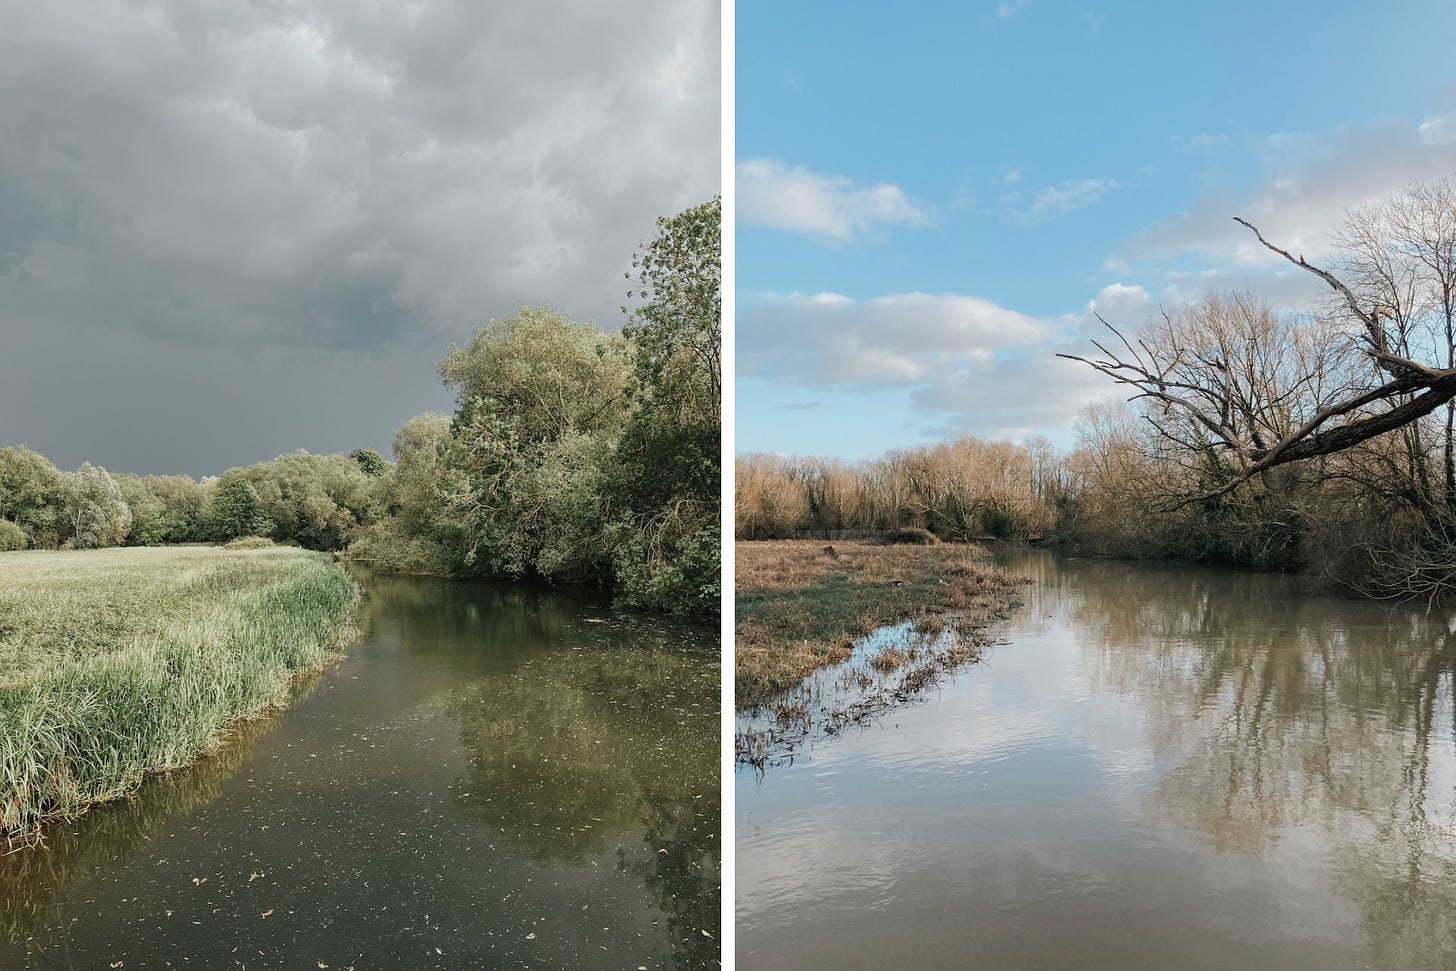 Two views of a river, with dramatic cloudy sky and scattered clouds on a blue sky